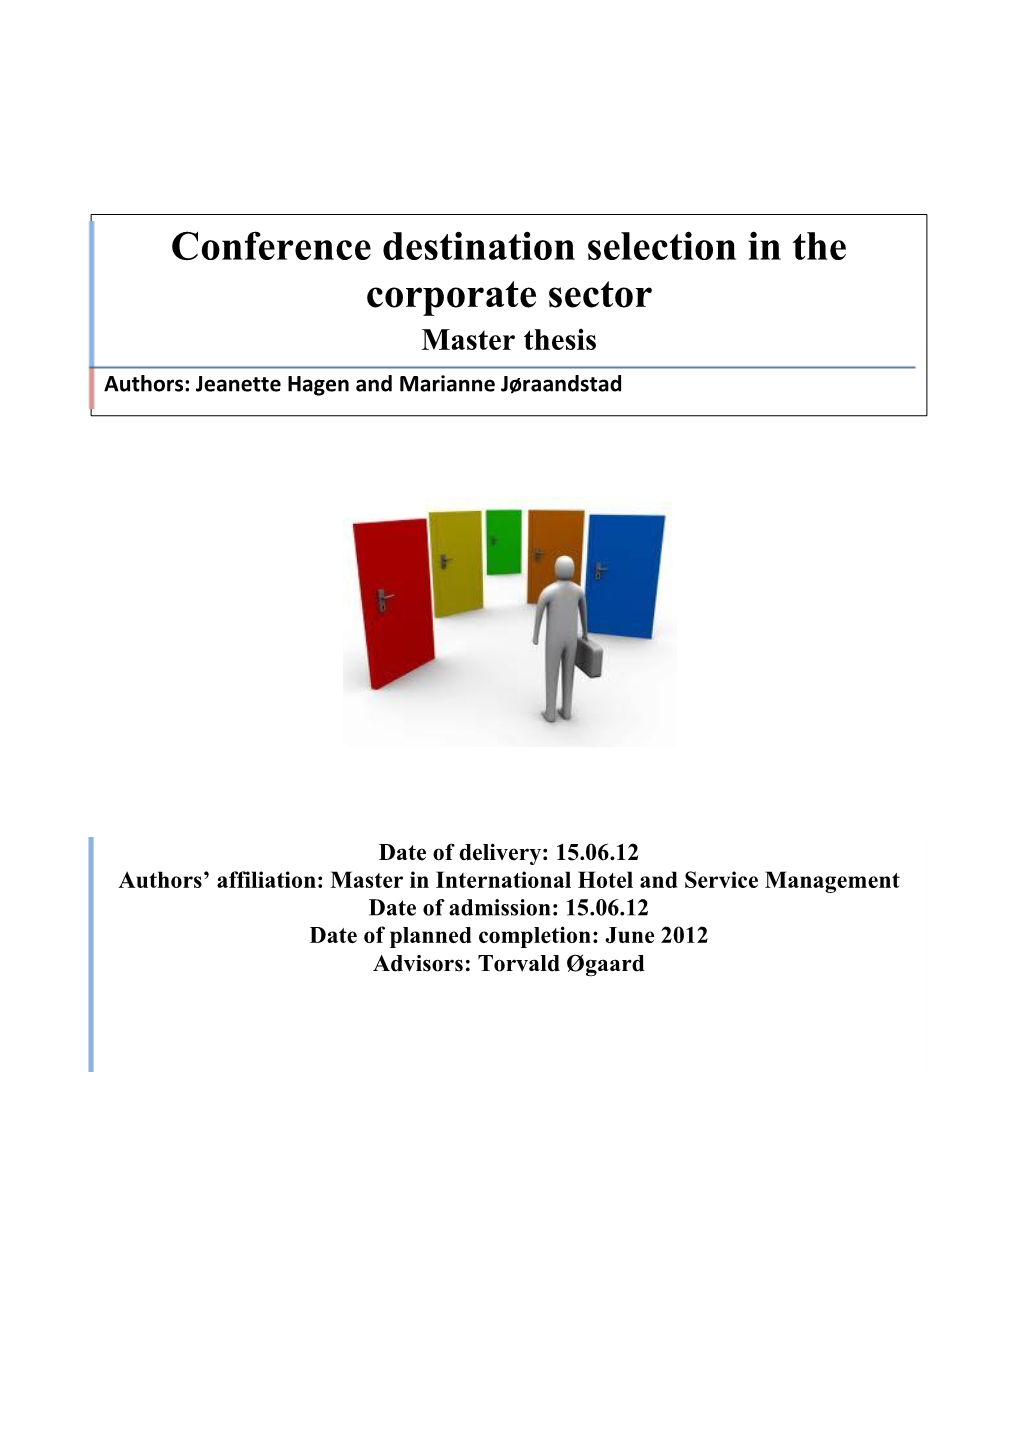 Conference Destination Selection in the Corporate Sector